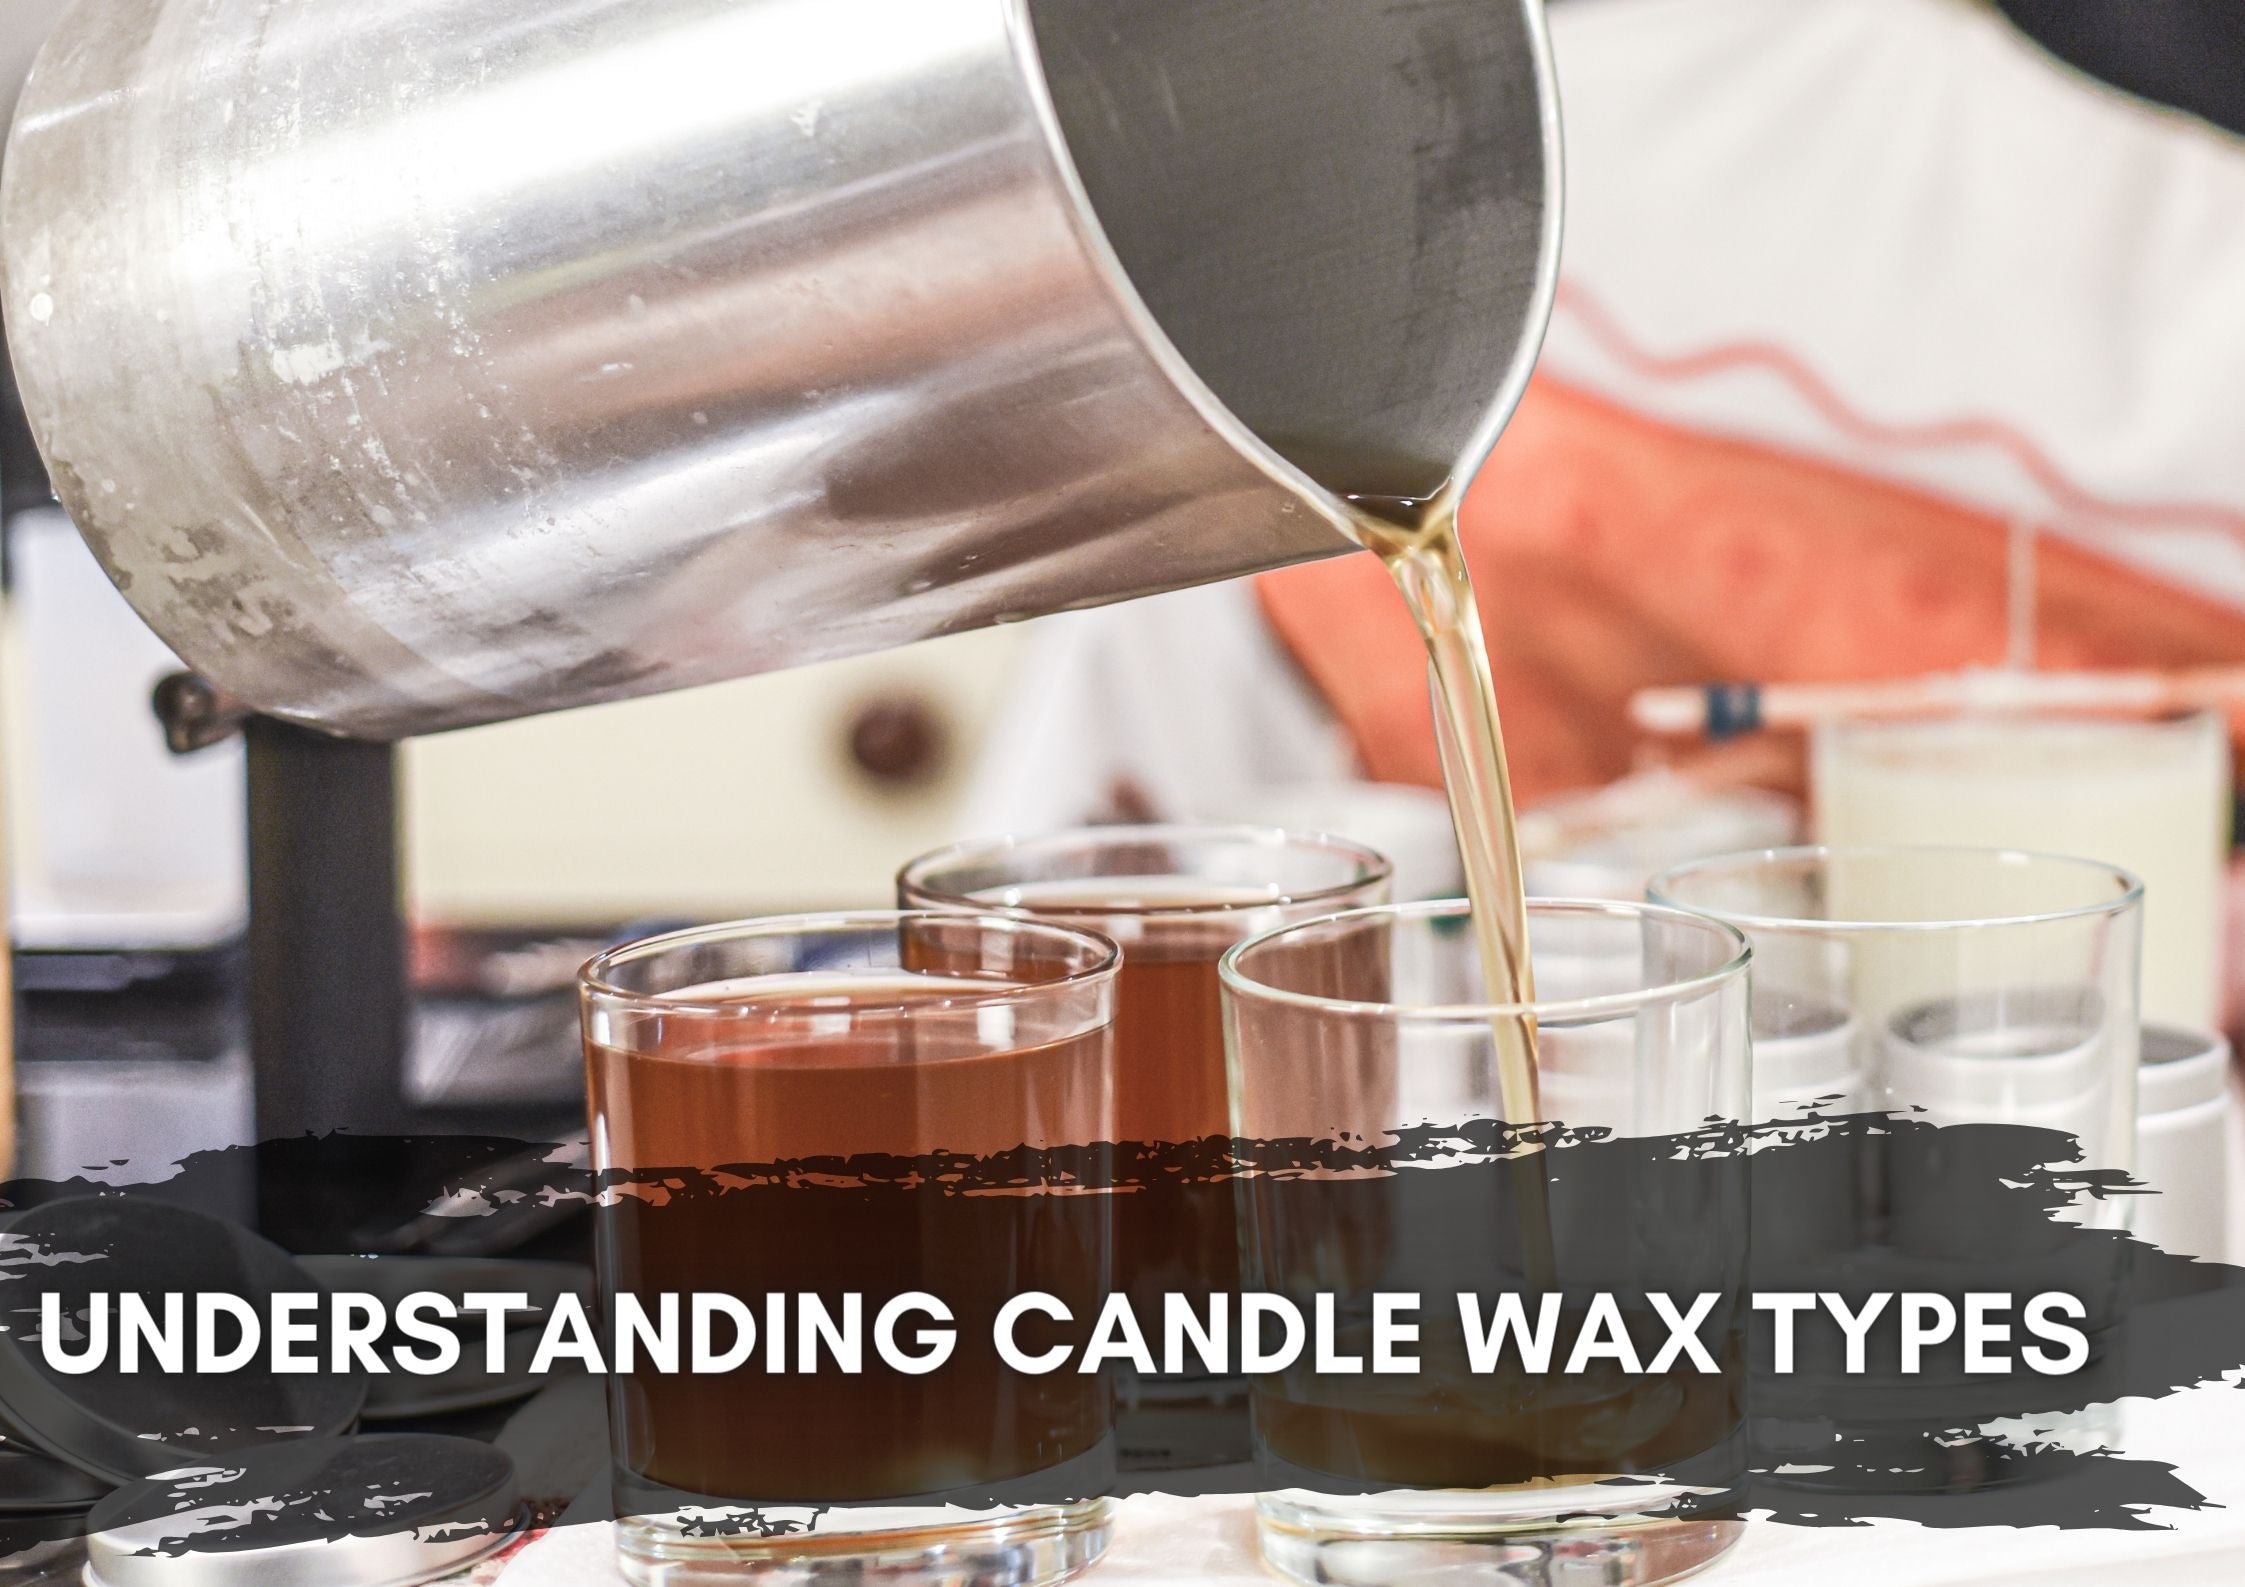 Types of candle wax